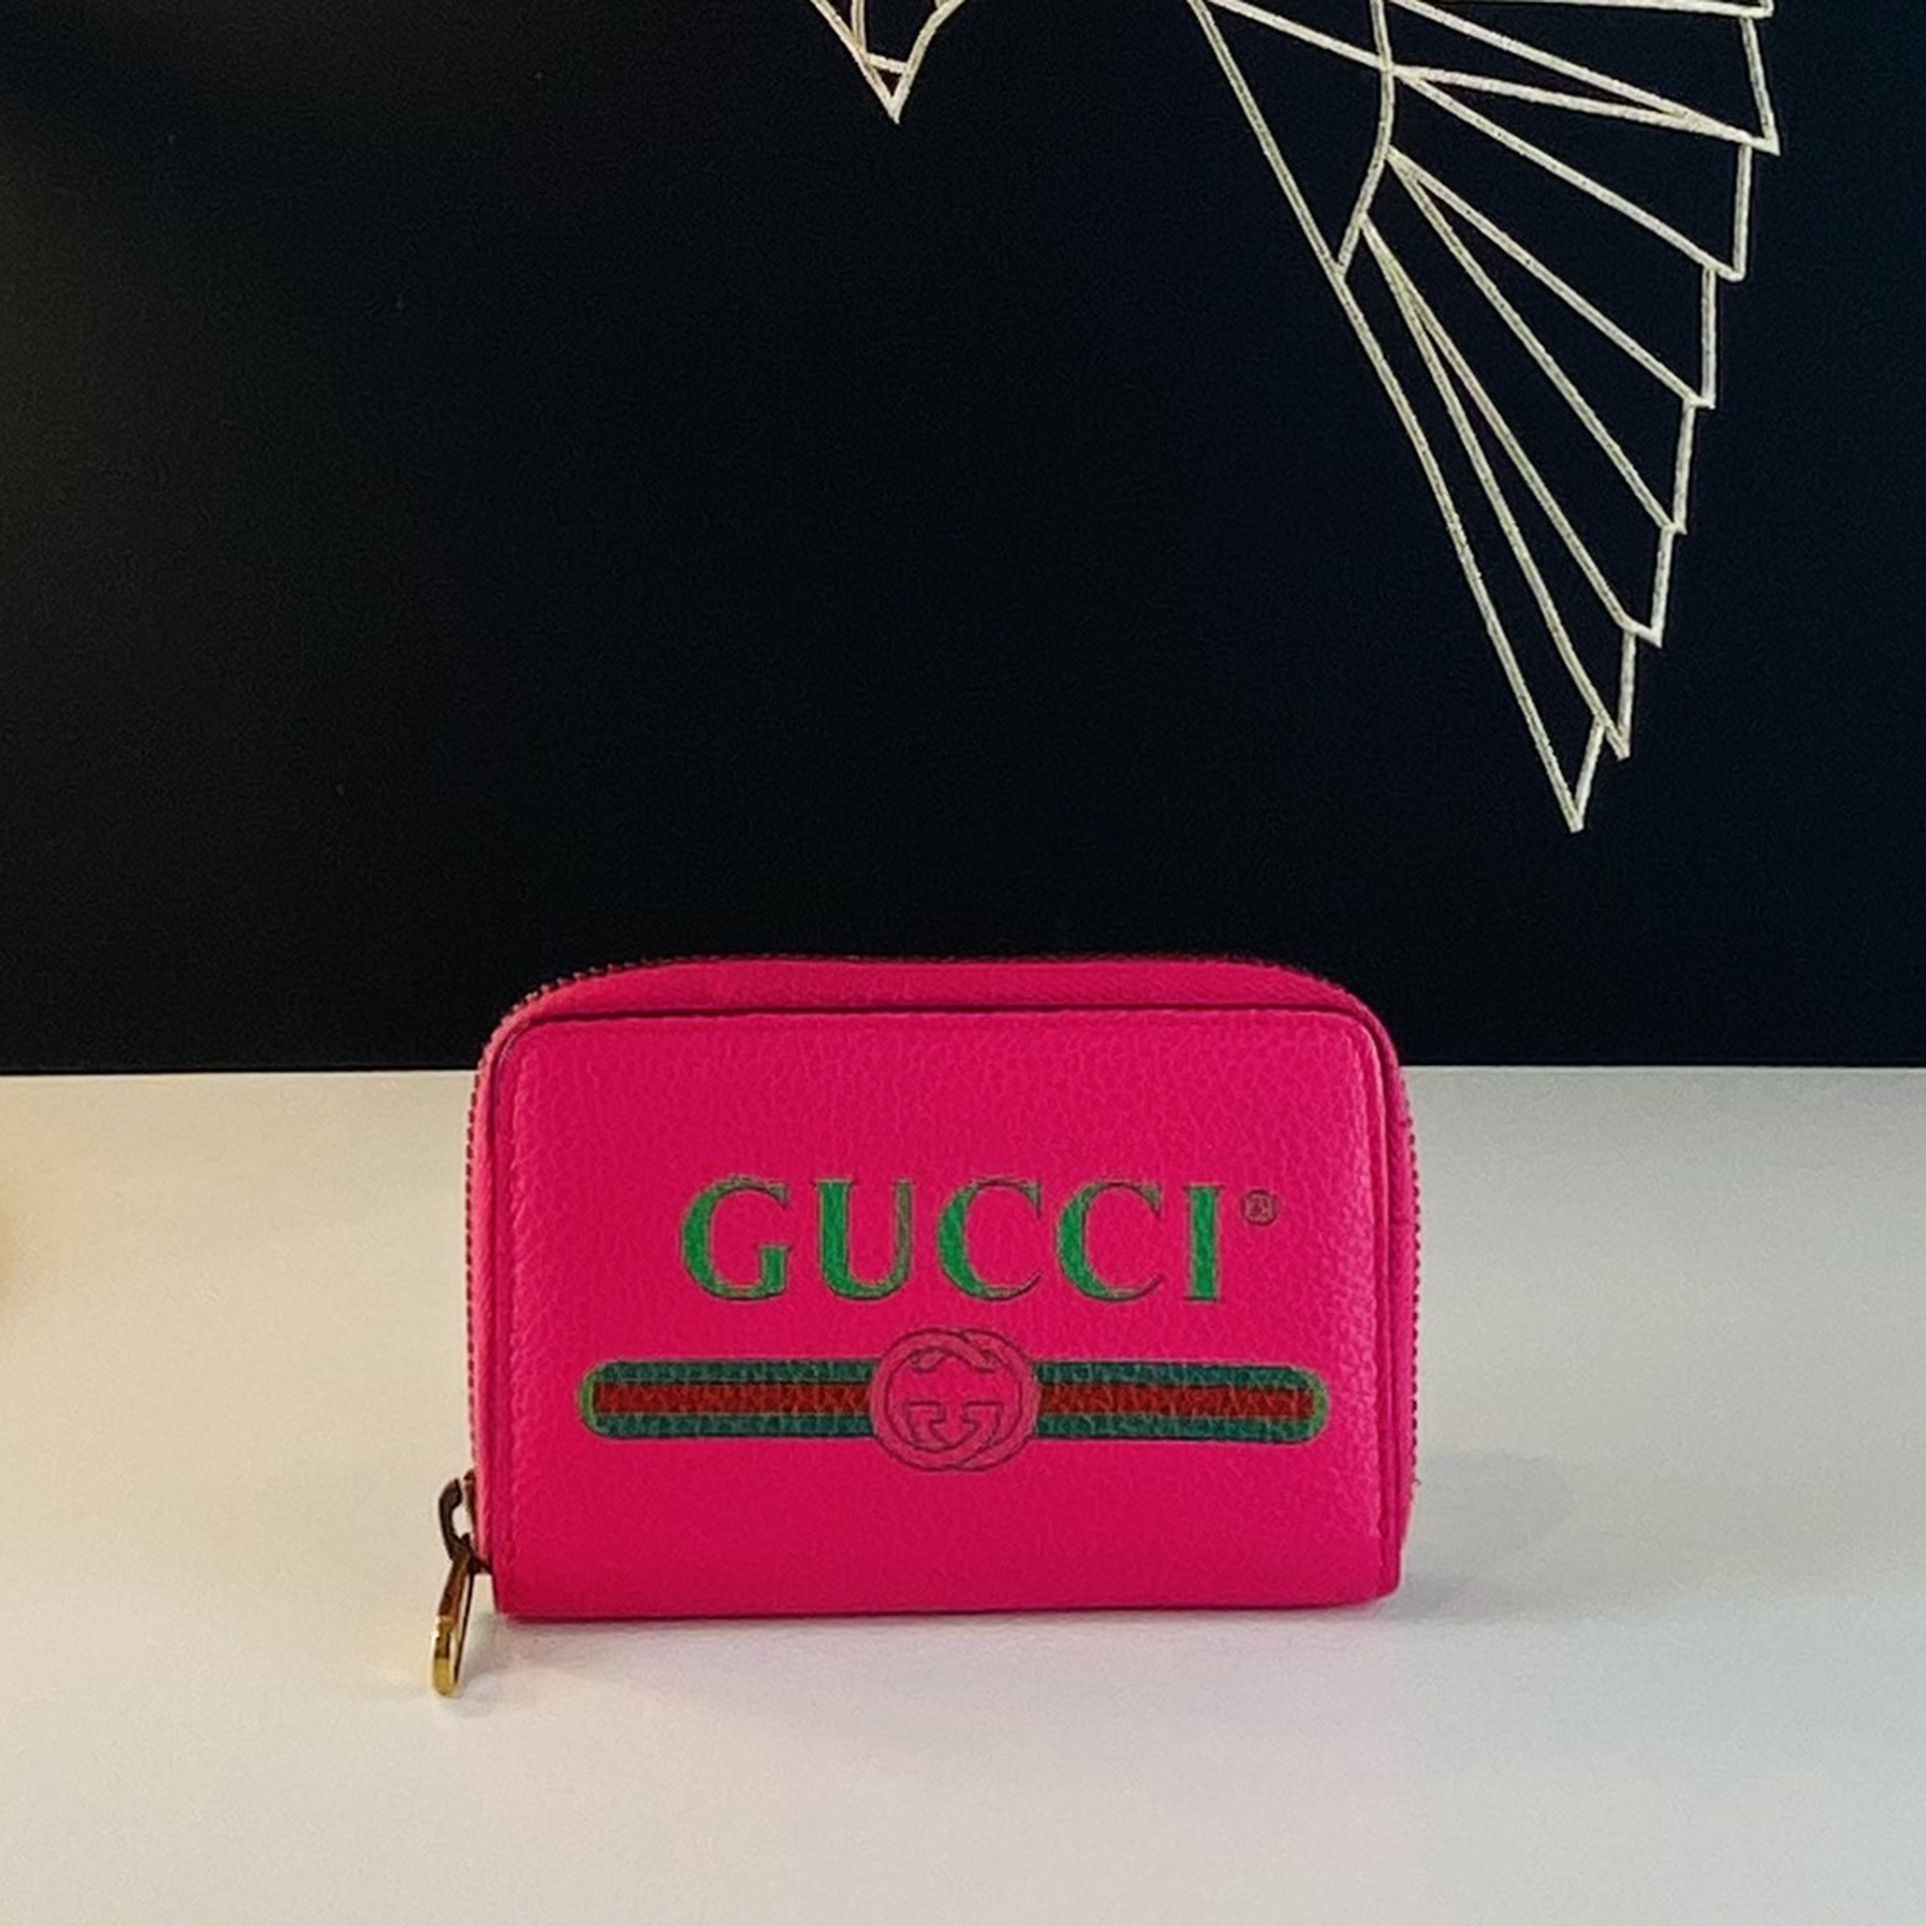 GUCCI Logo Pink Leather Coin Wallet